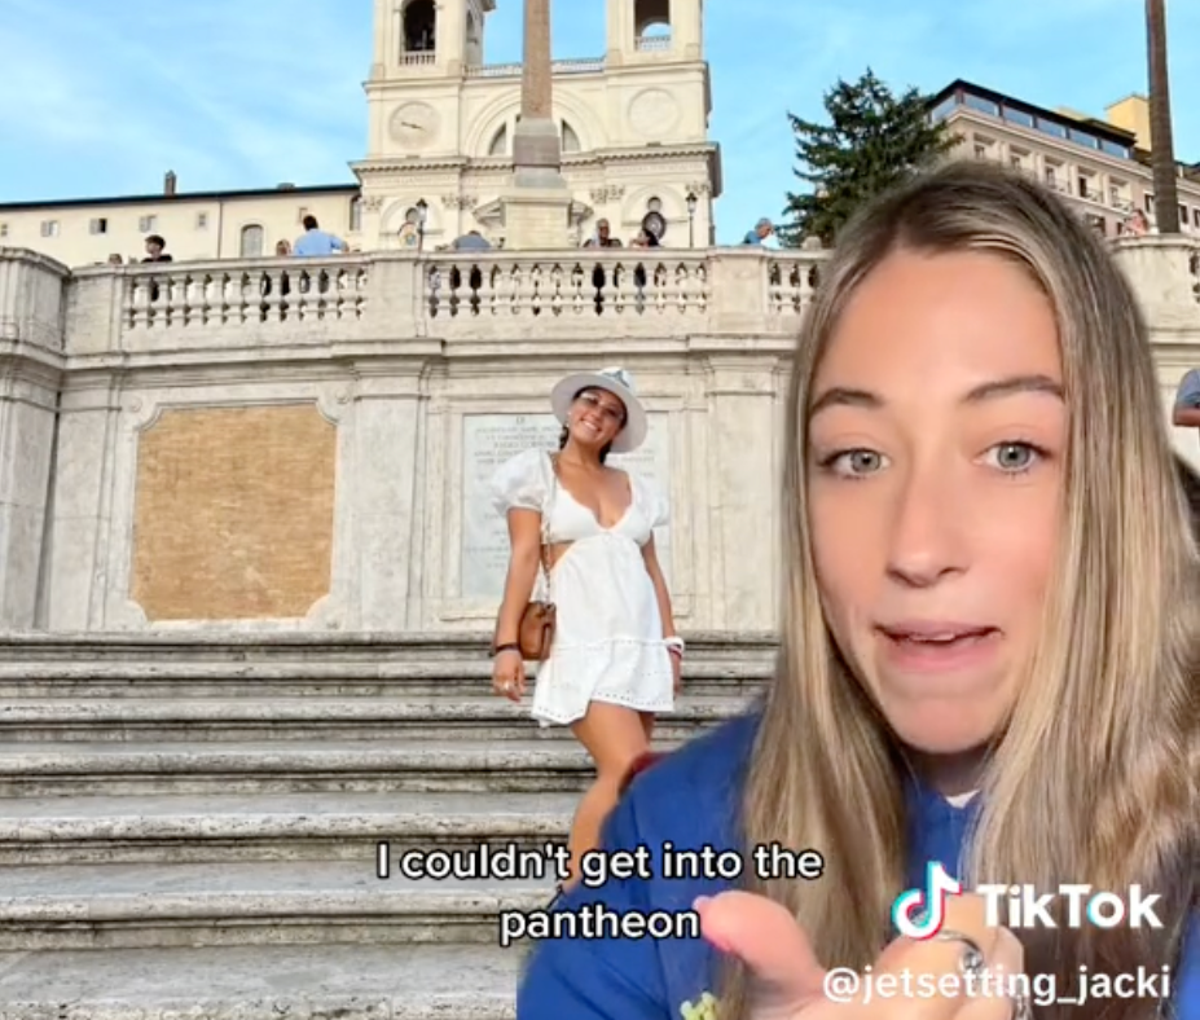 Woman warns tourists about strict Rome dress code